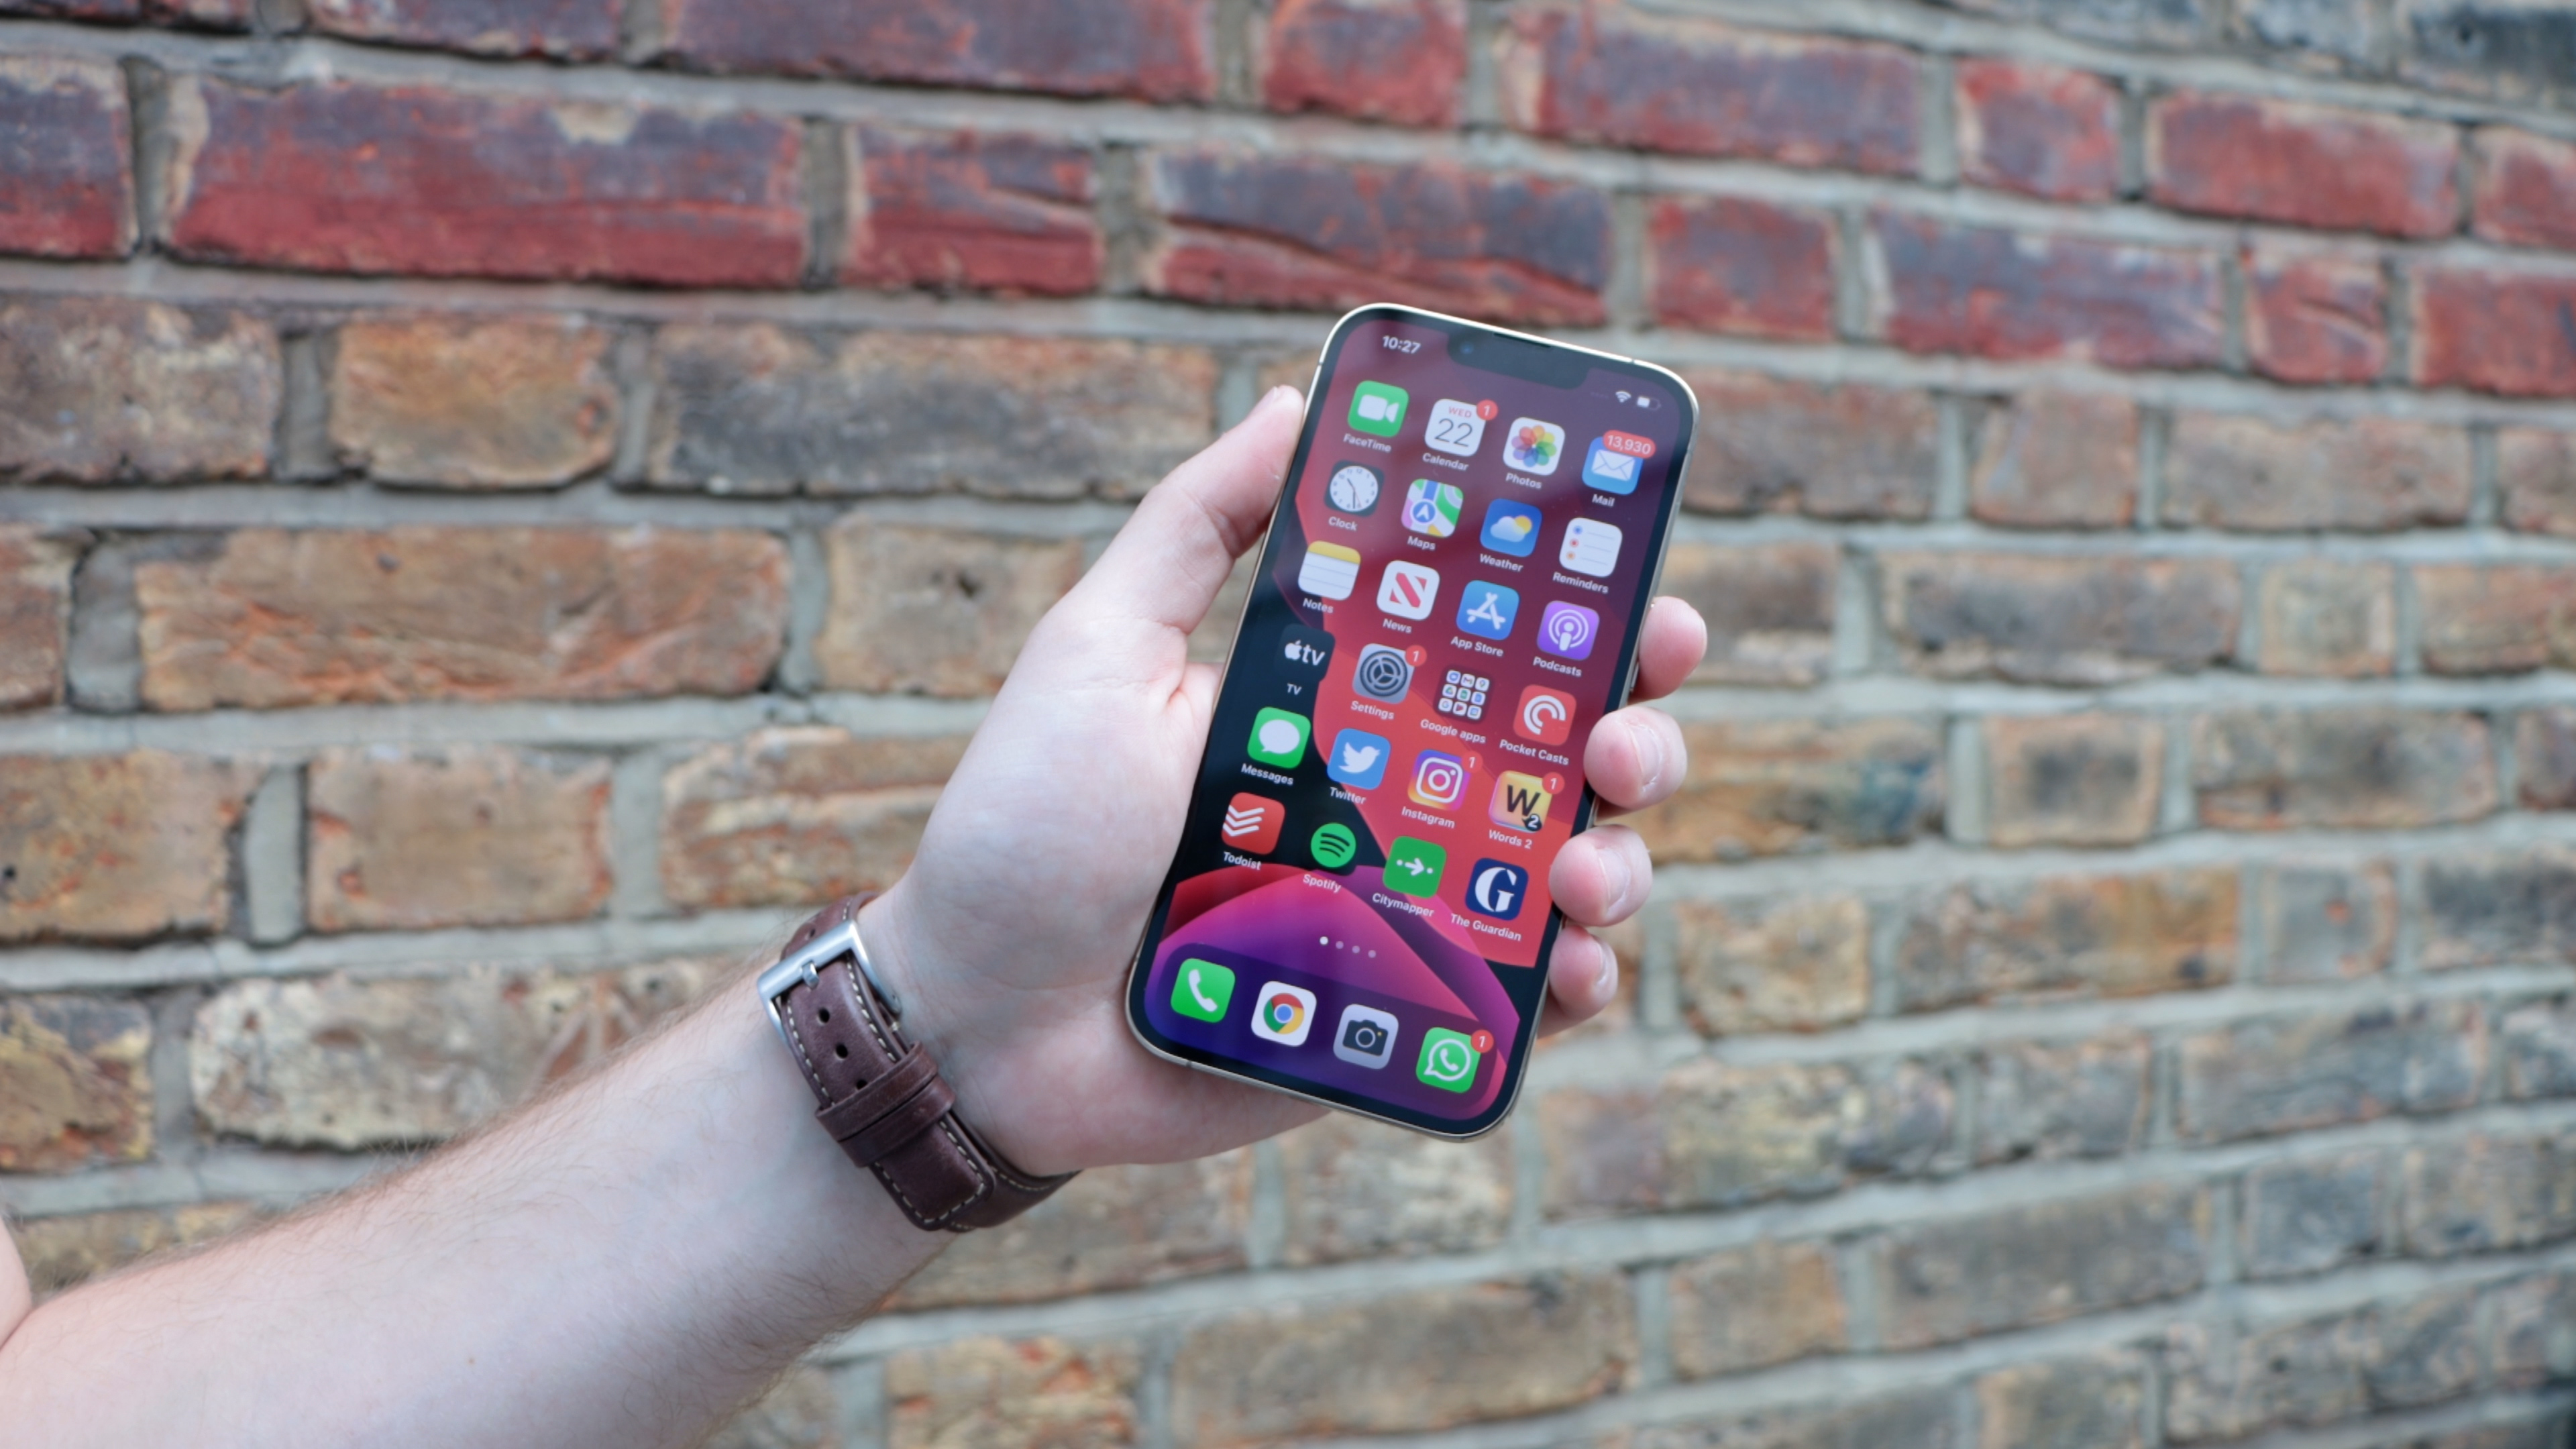 An iPhone 13 Pro in someone's hand, with a brick wall in the background